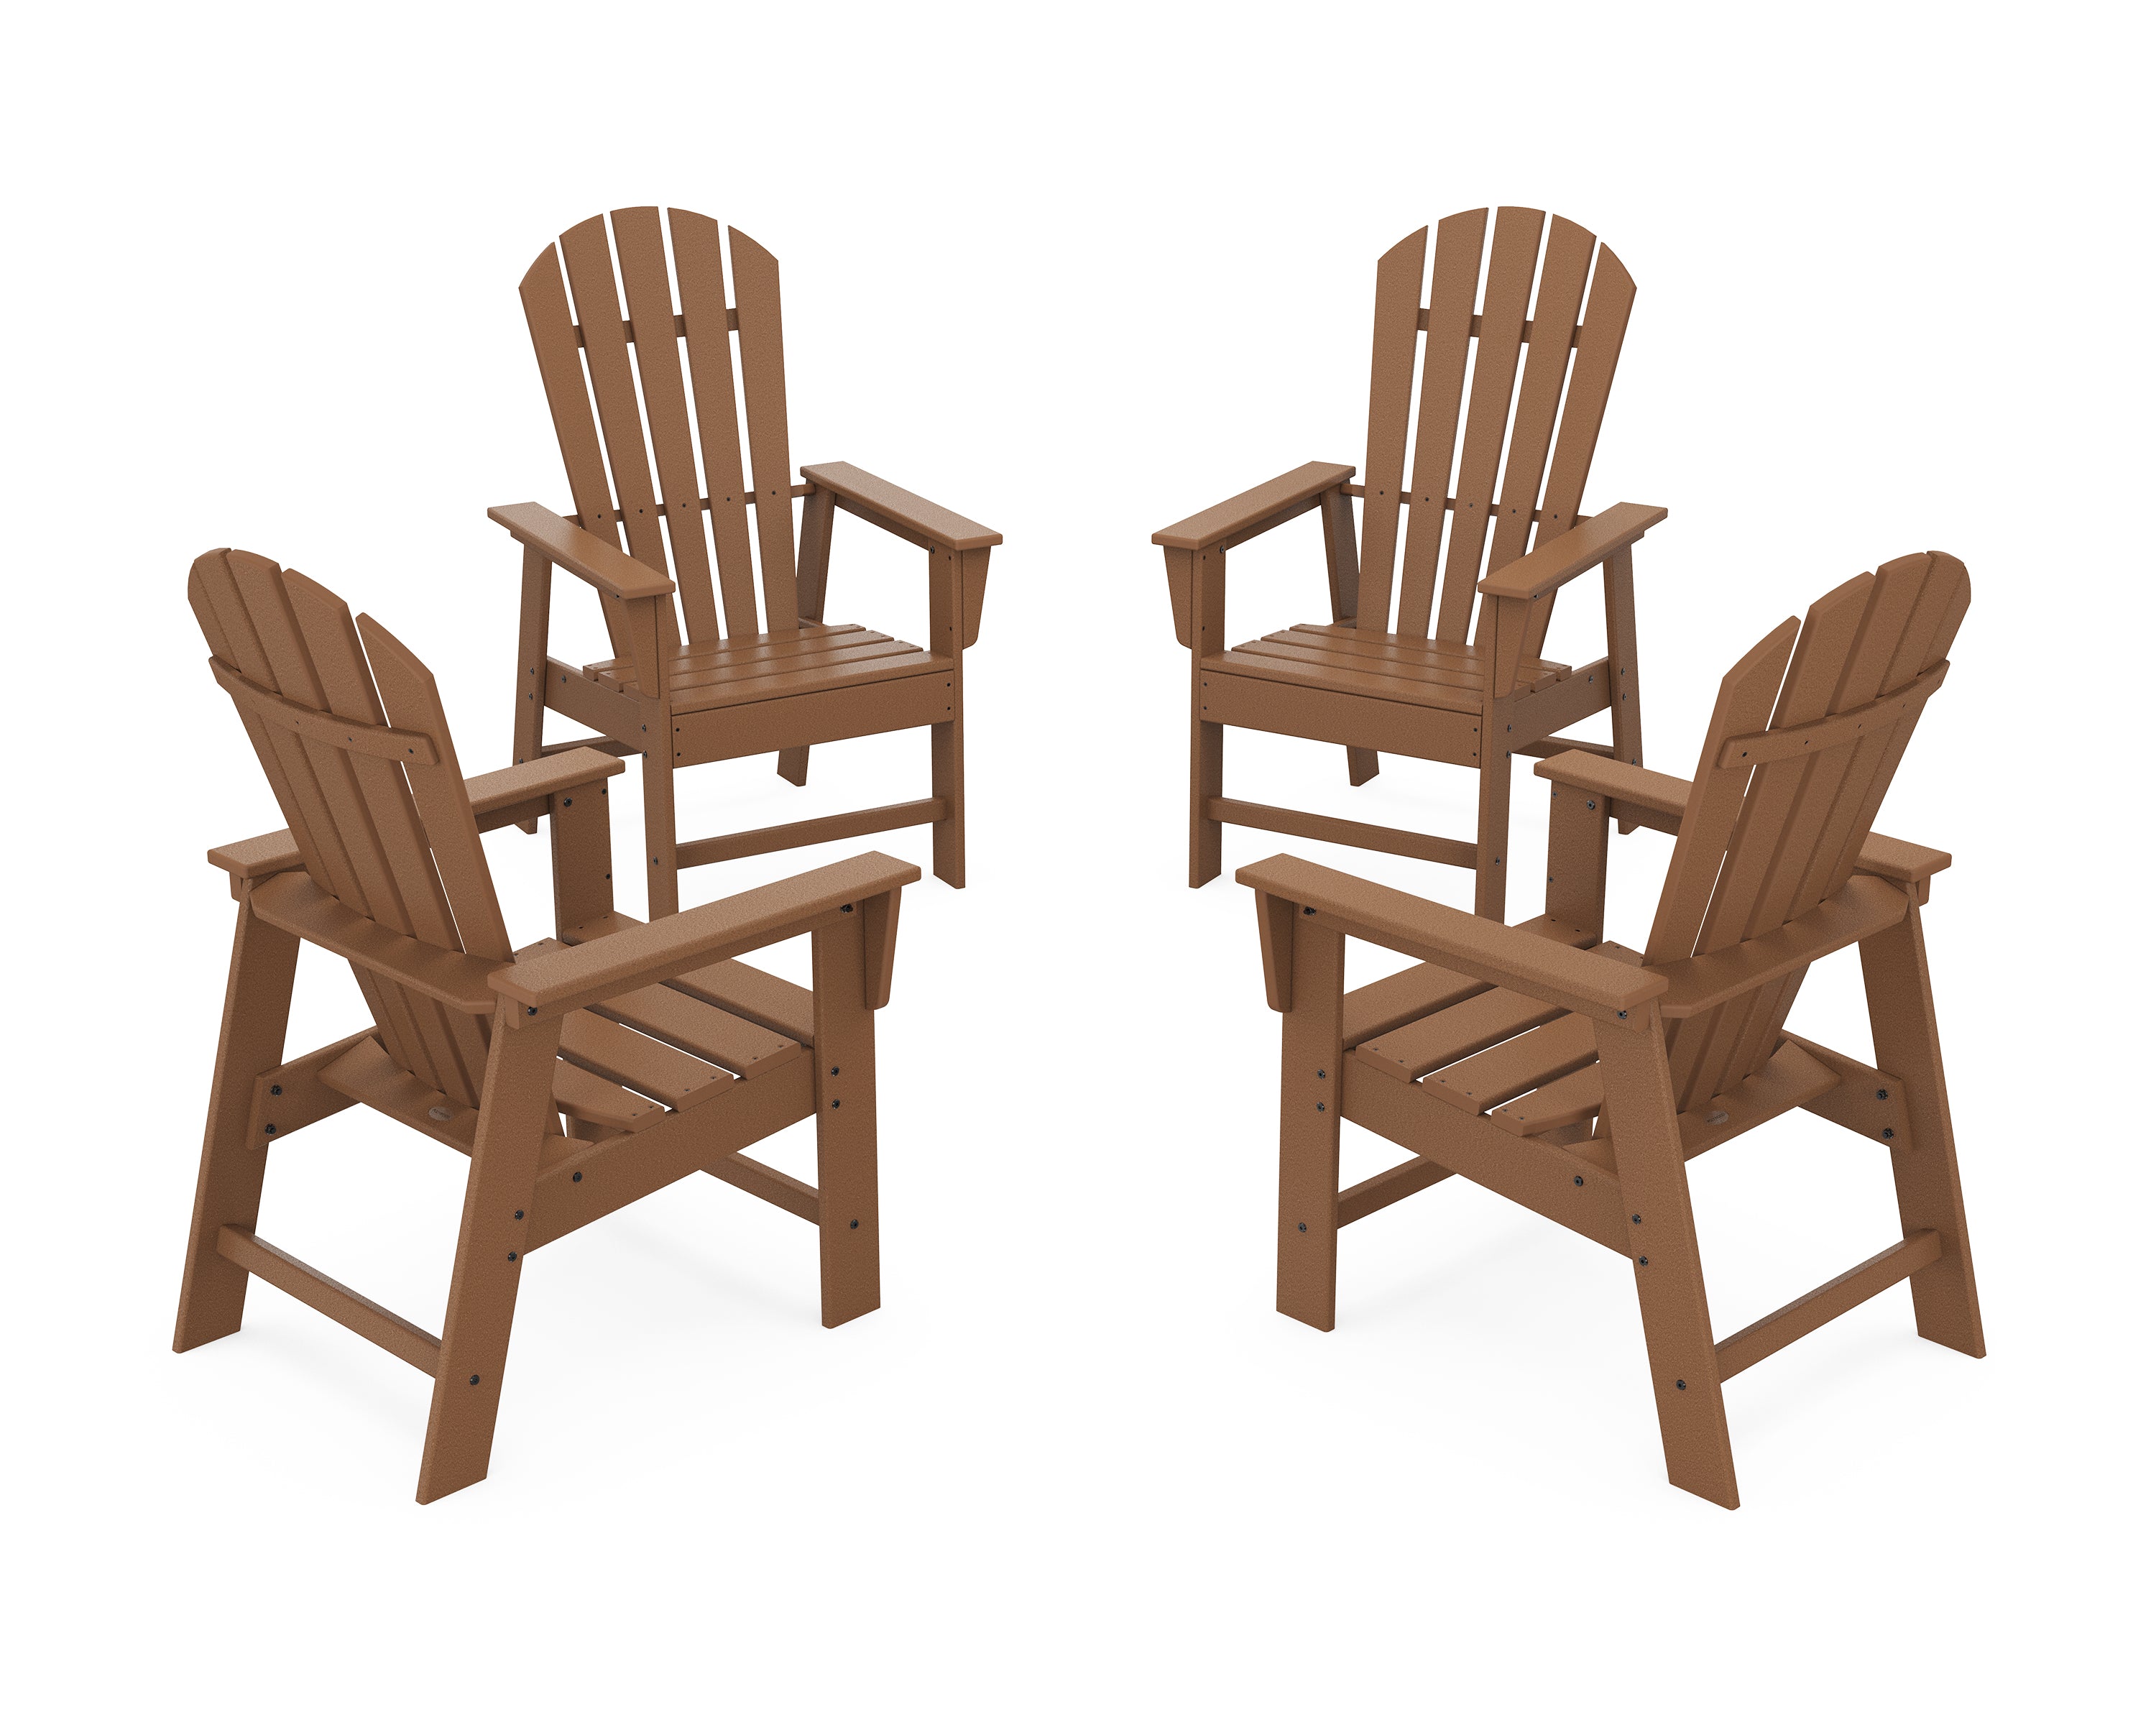 POLYWOOD® 4-Piece South Beach Casual Chair Conversation Set in Teak